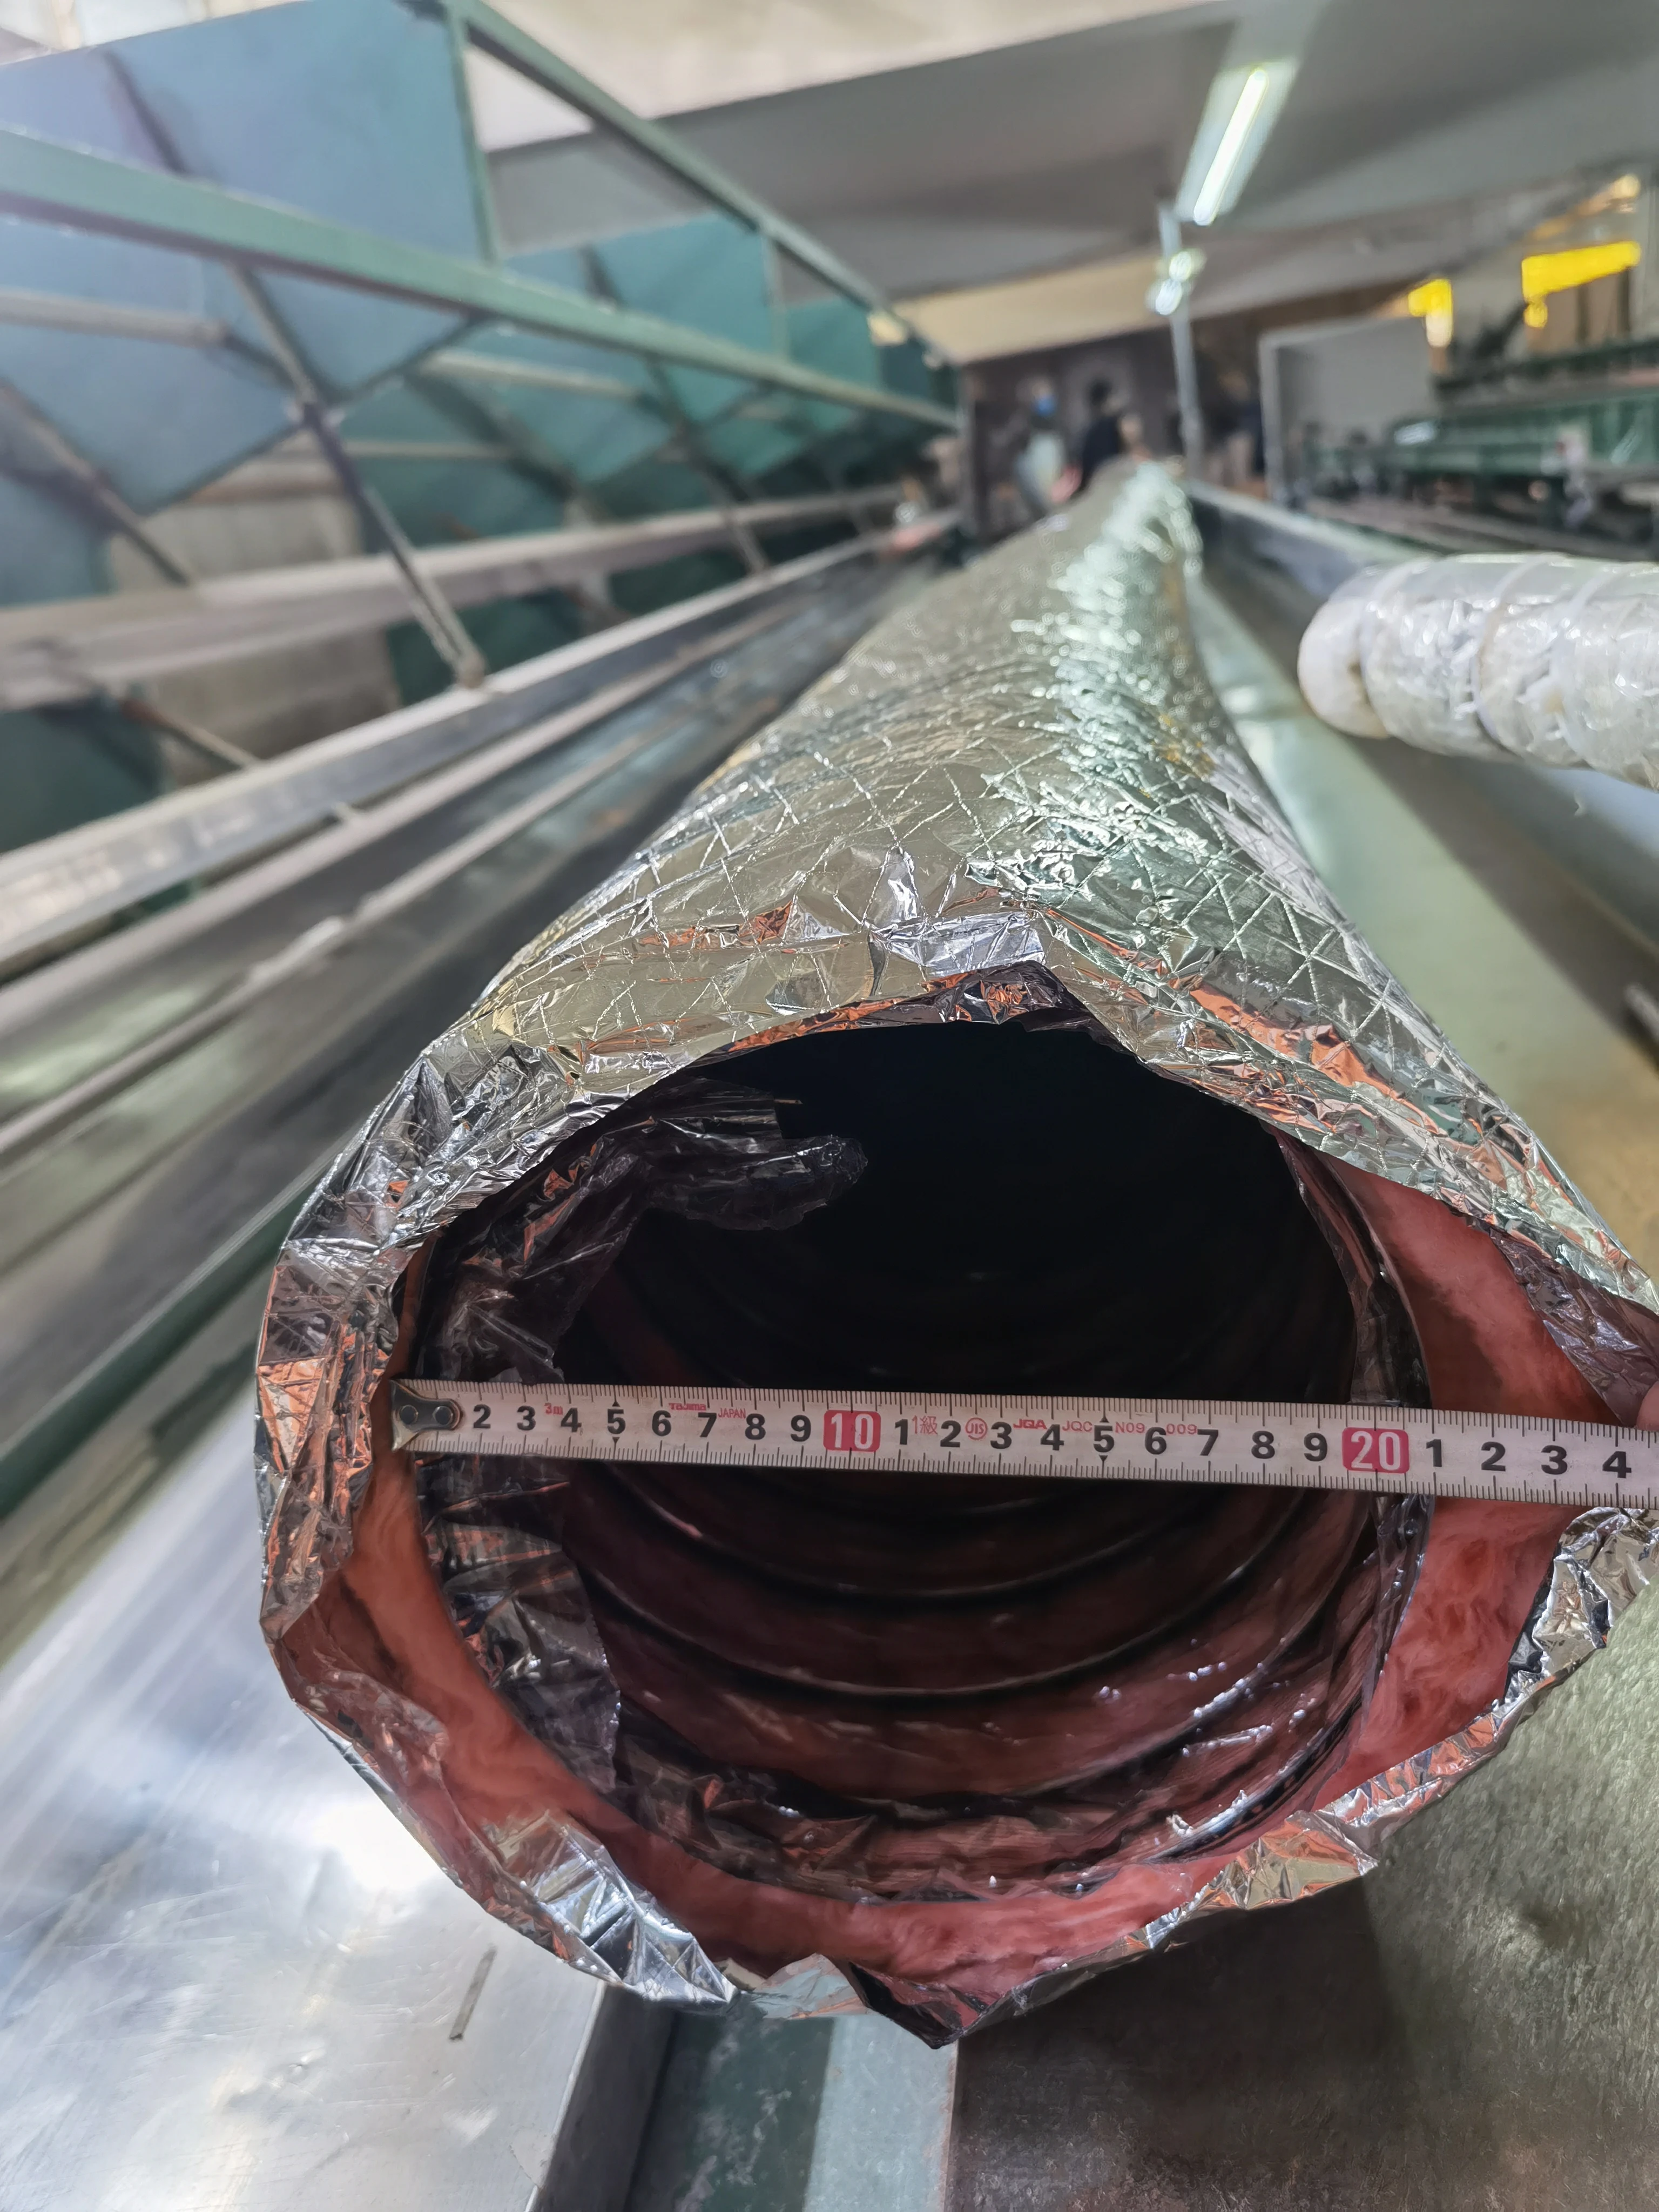 R6 R8 aluminum foil flexible duct for HVAC Insulated duct with Heat Resistance 1 YEAR  Online Technical Support